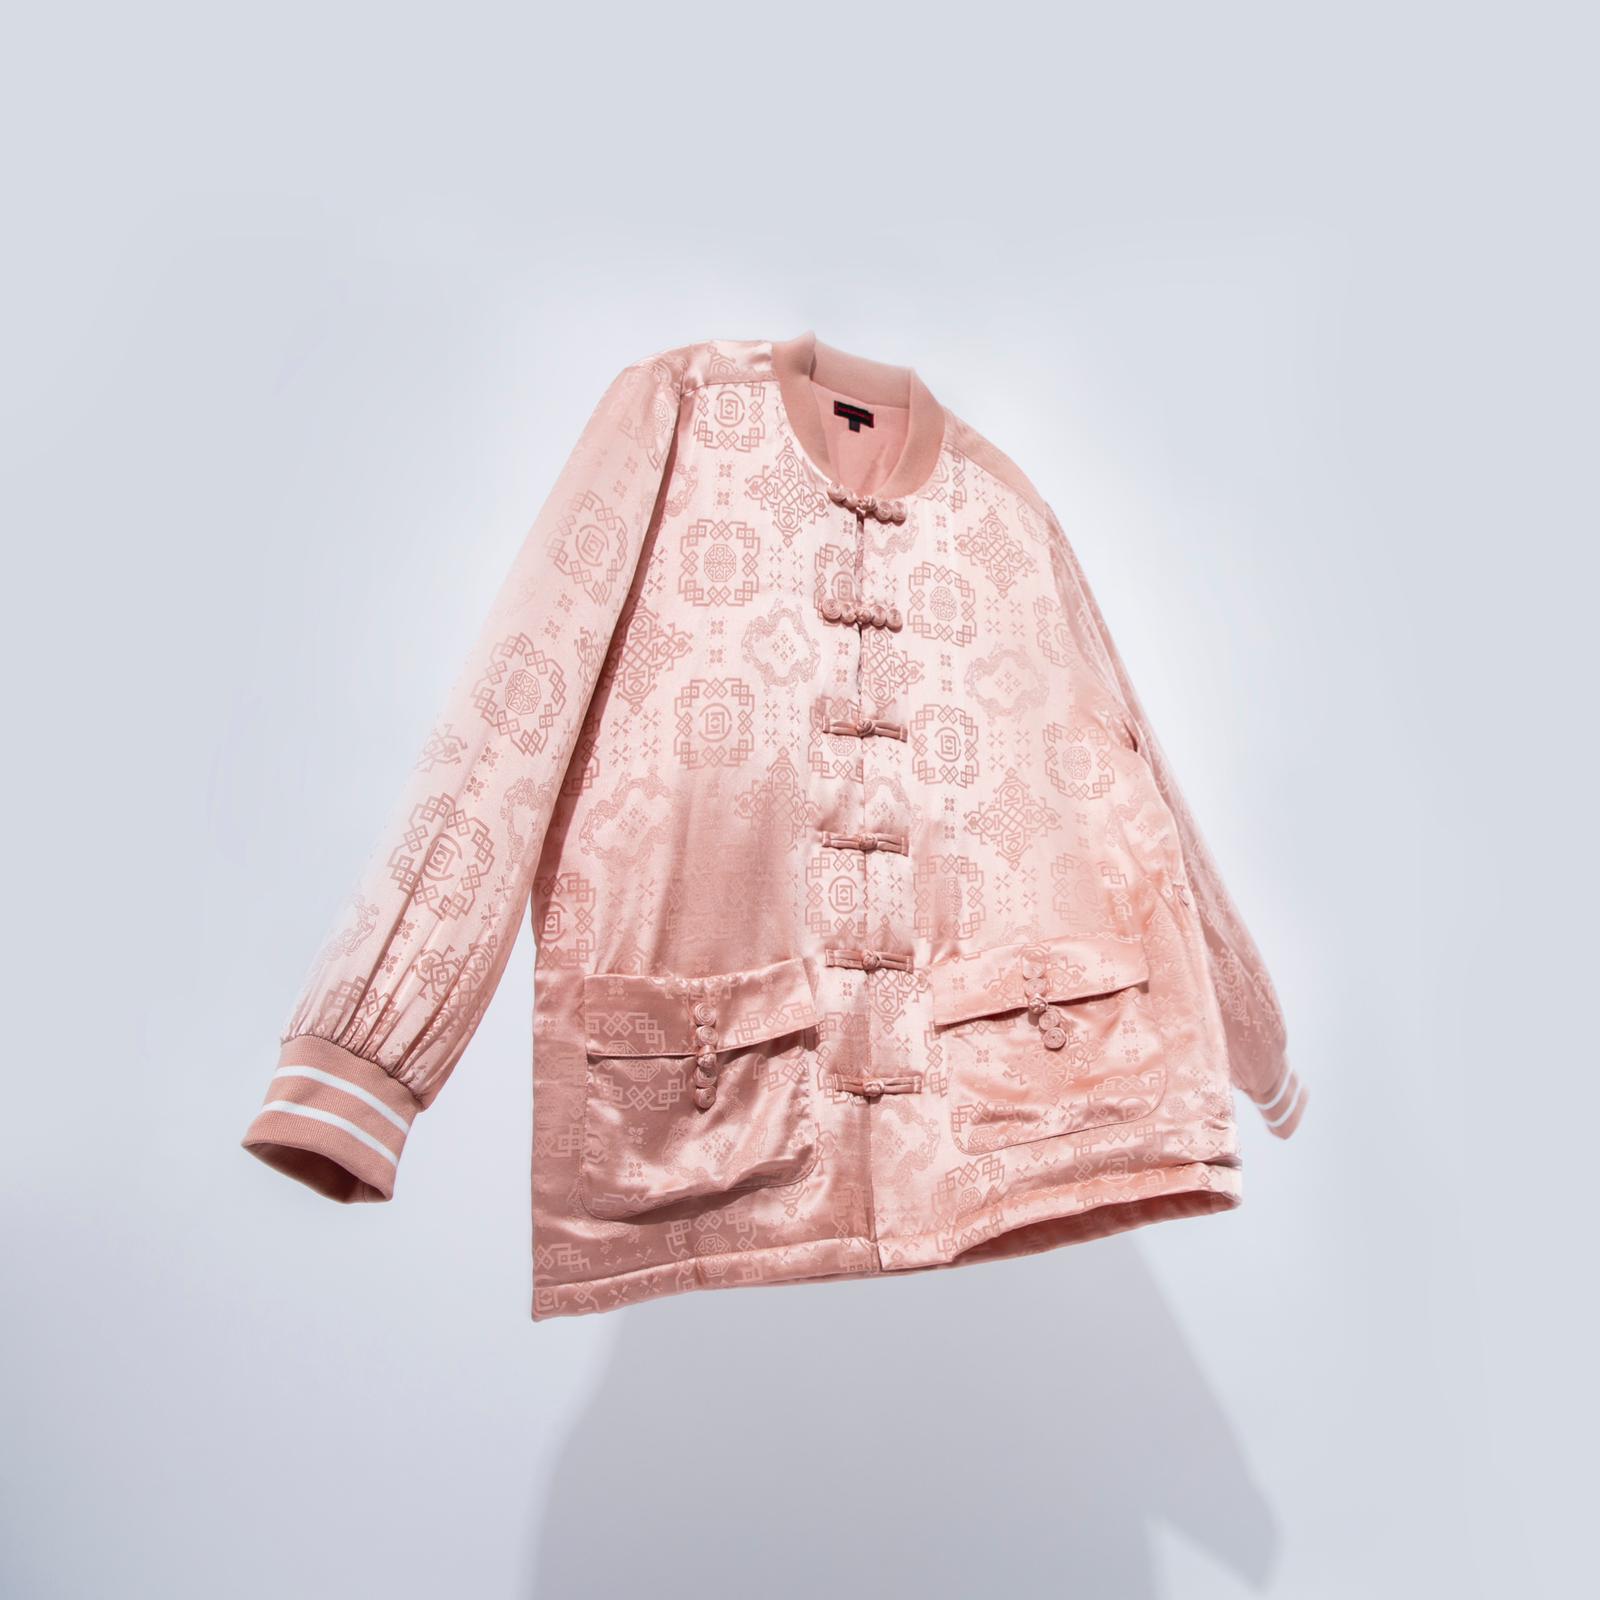 CLOT'S Iconic Silk Royale Makes a Pink 